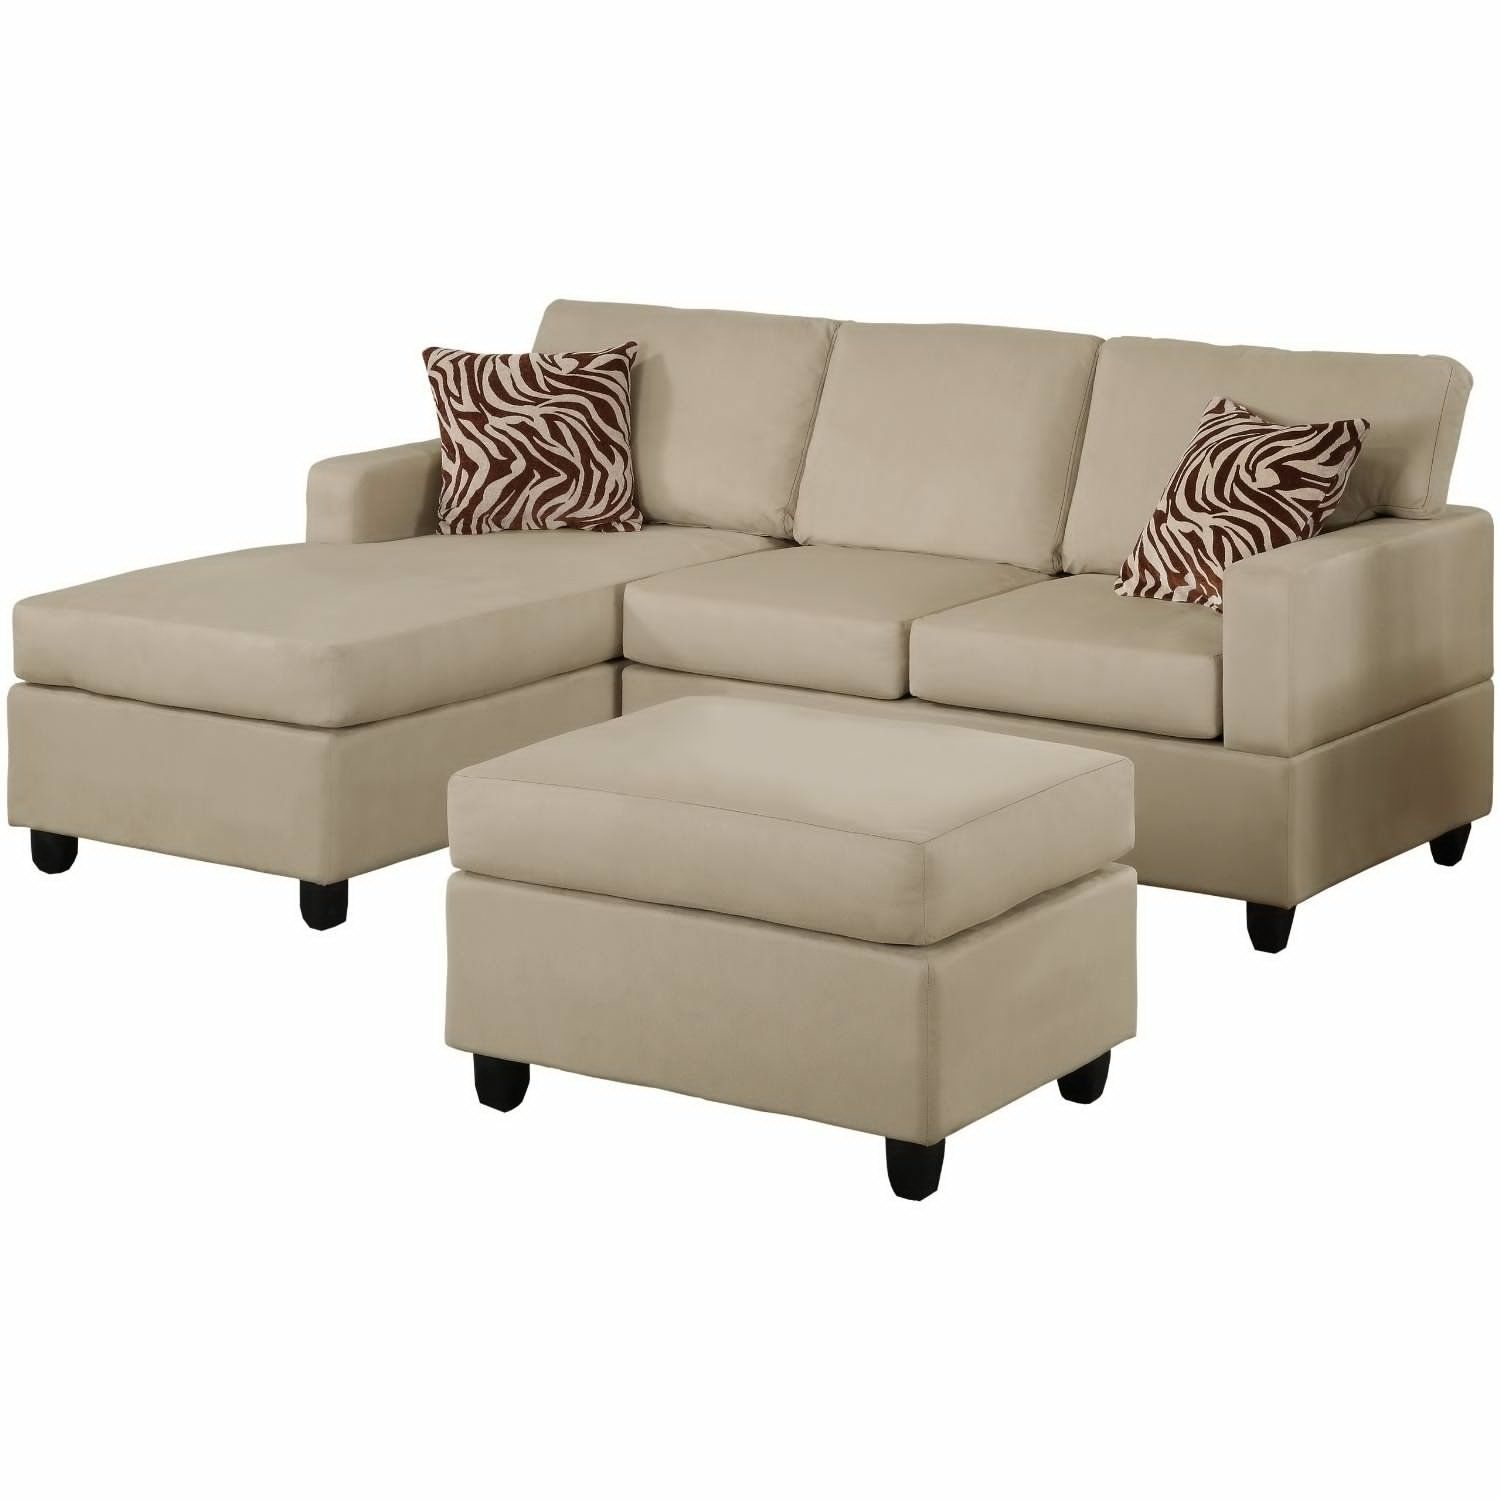 Sectional Sofa Design: Thomasville Sectional Sofas Recliners Price Within Thomasville Sectional Sofas (Photo 2 of 10)